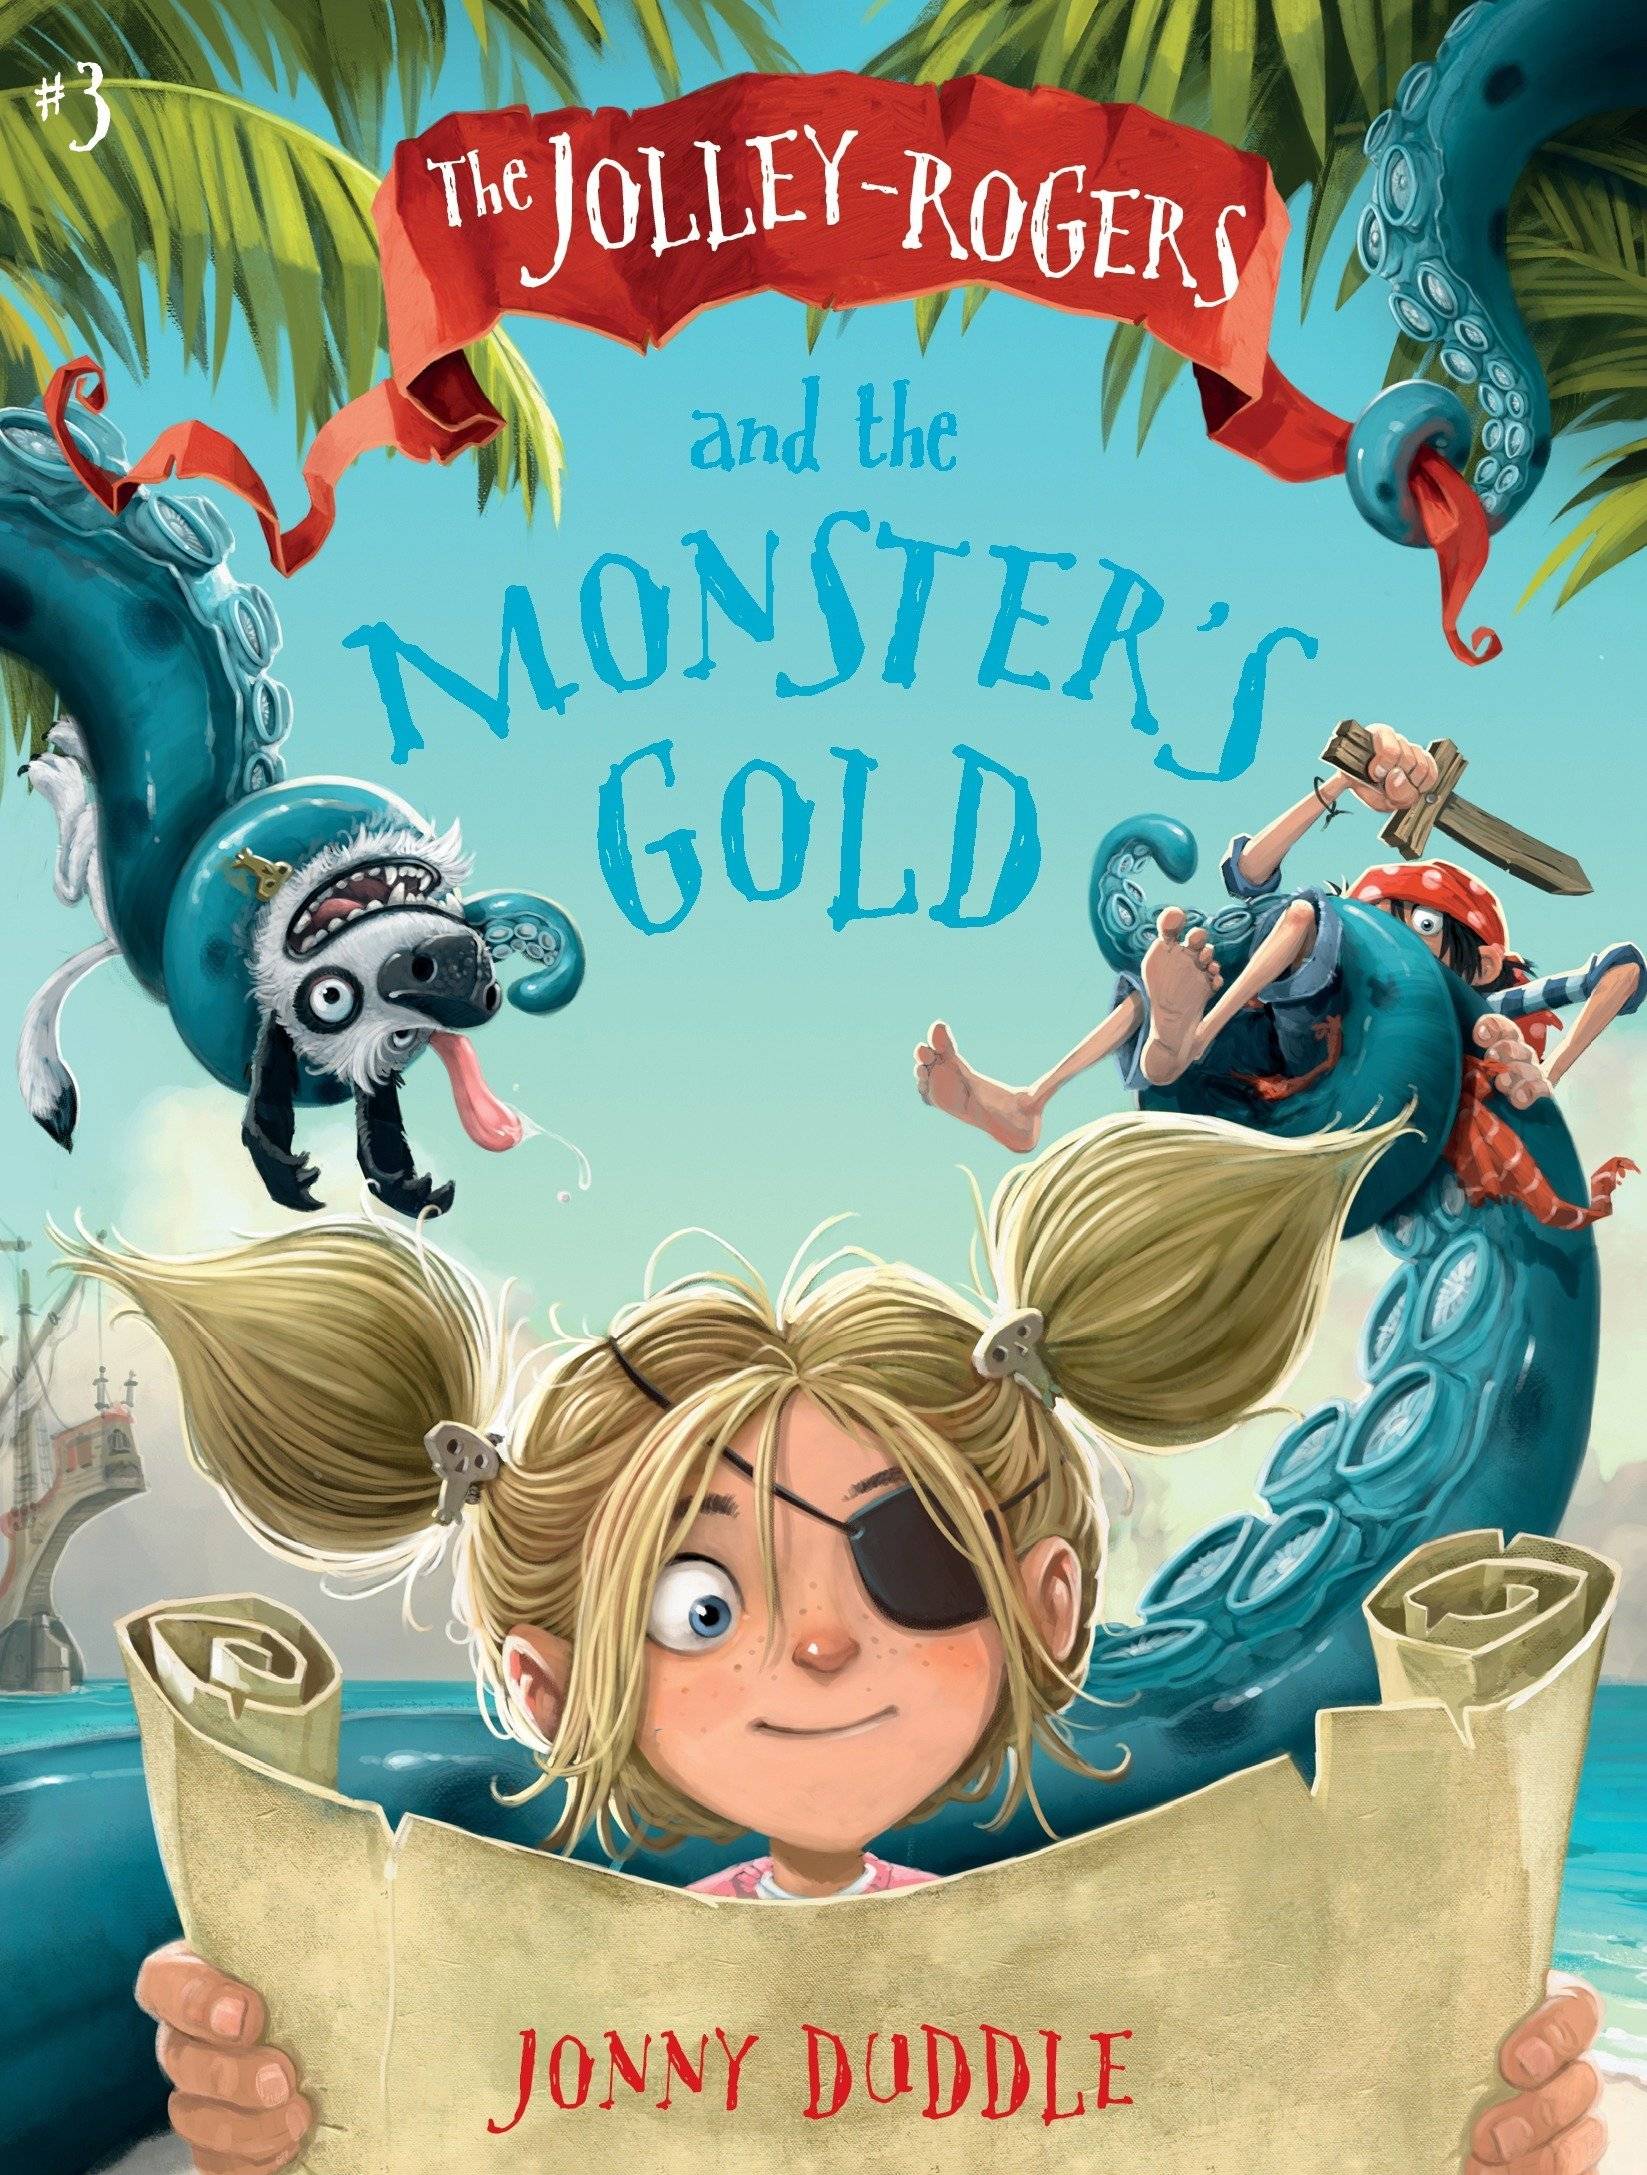 IMG : The Jolley-Rogers and the Monster's Gold